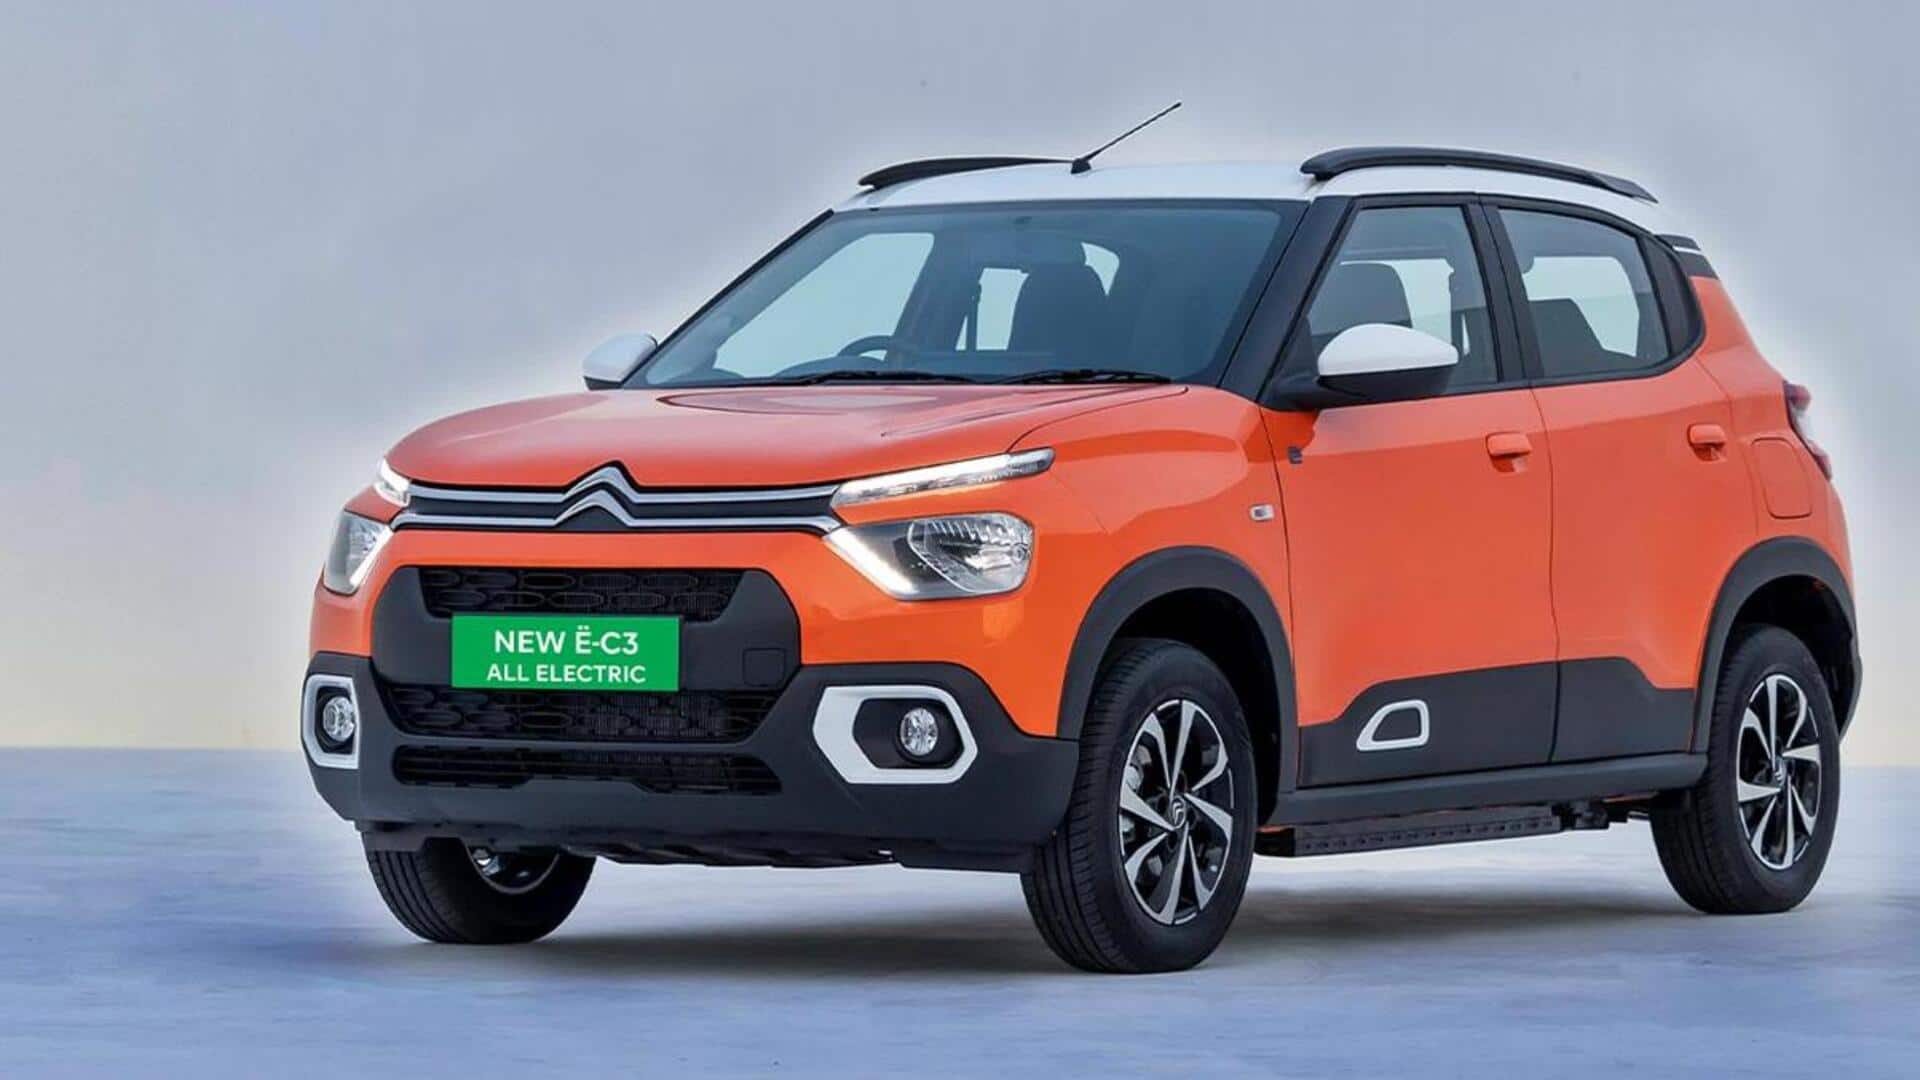 Citroen eC3 becomes costlier in India: Check revised pricing